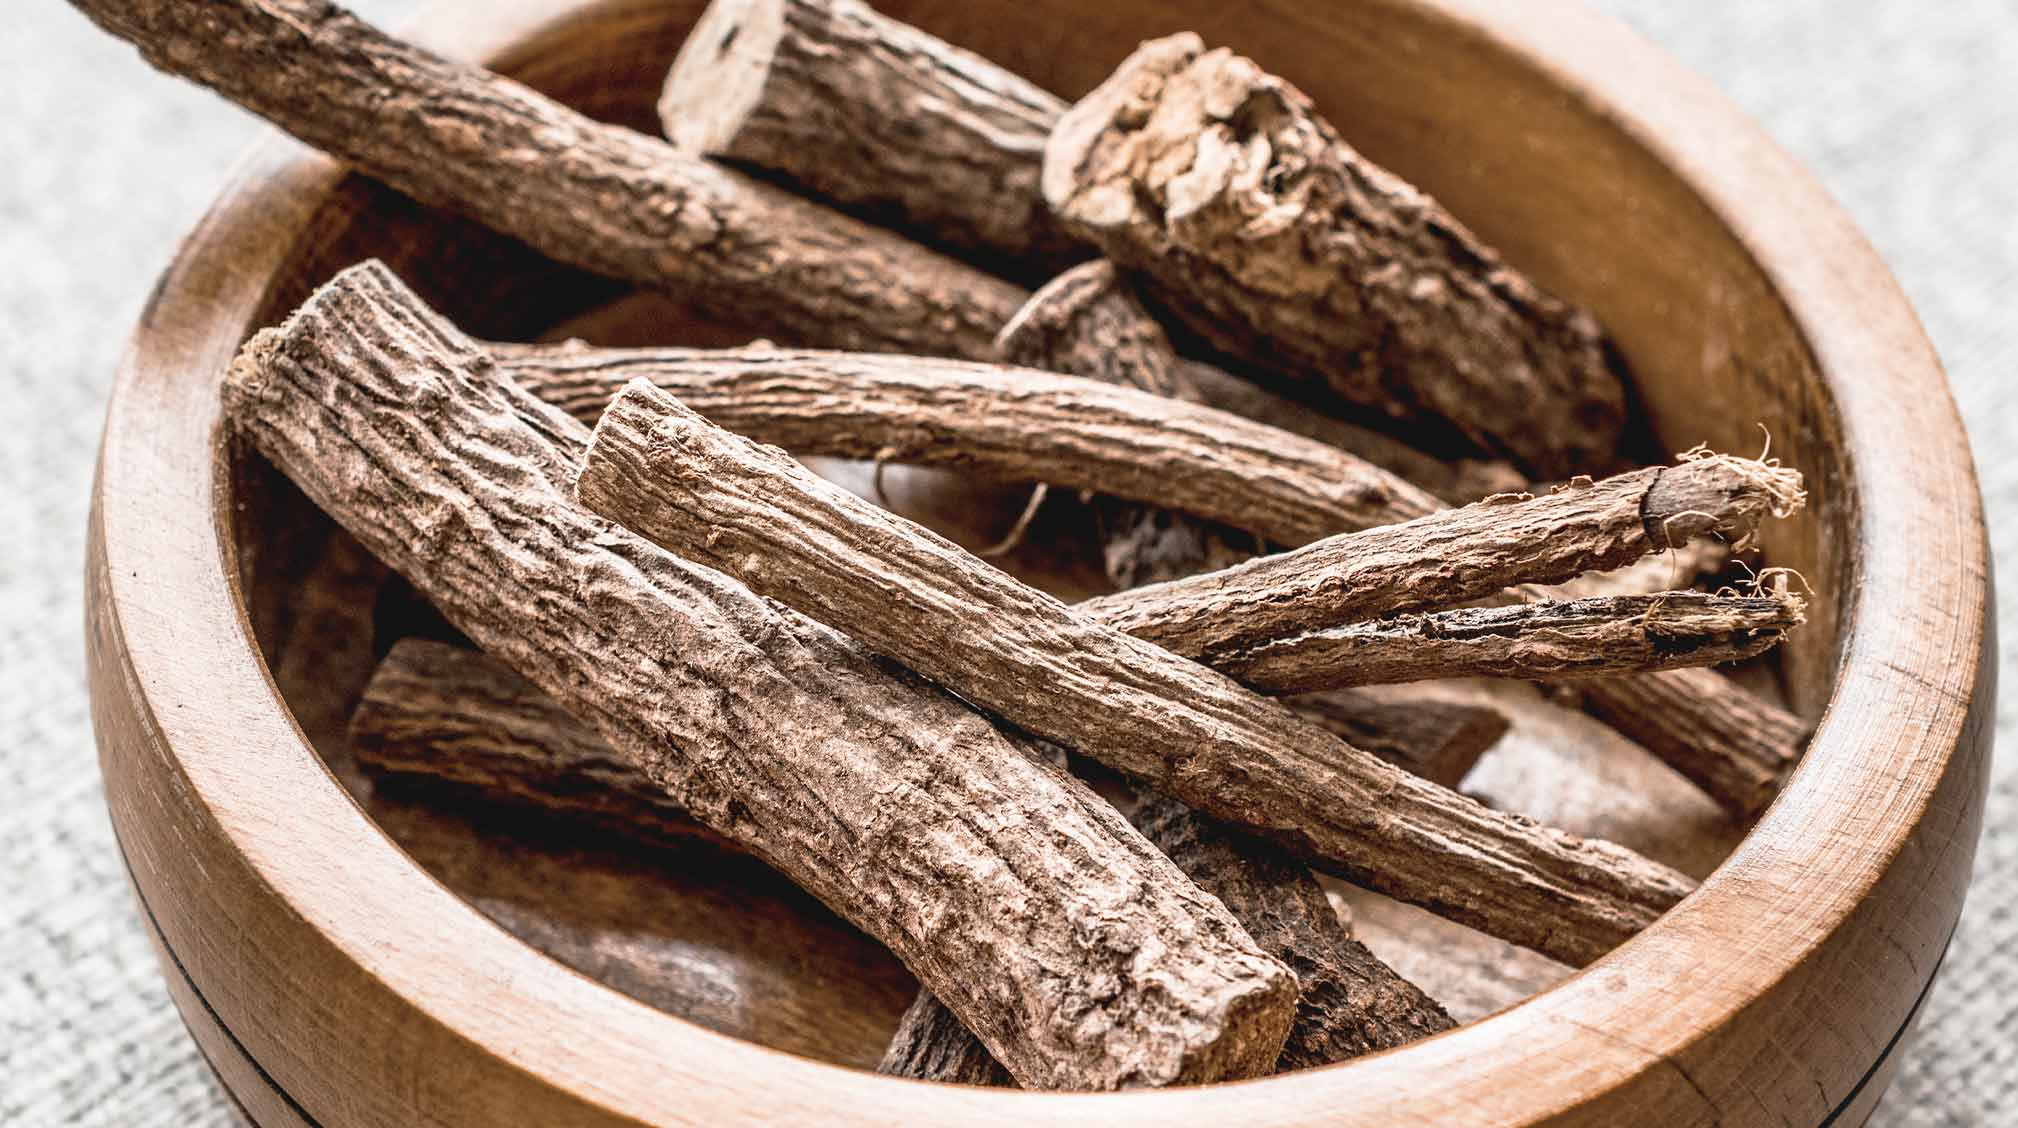 licorice root in a bowl